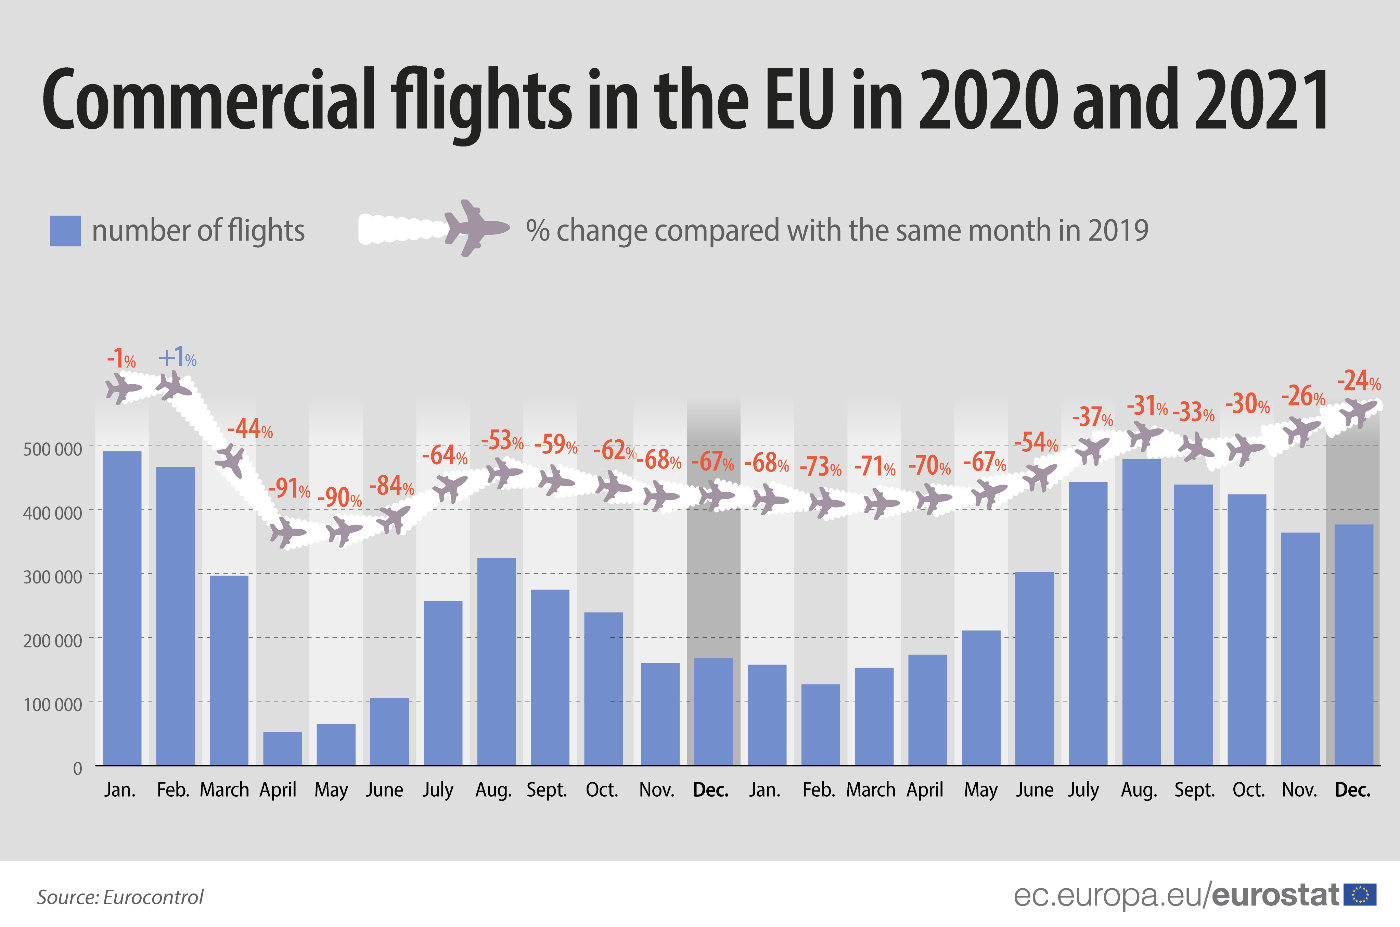 Bar graph: Commercial flights in the EU in 2020 and 2021, % change compared with previous year and number of flights